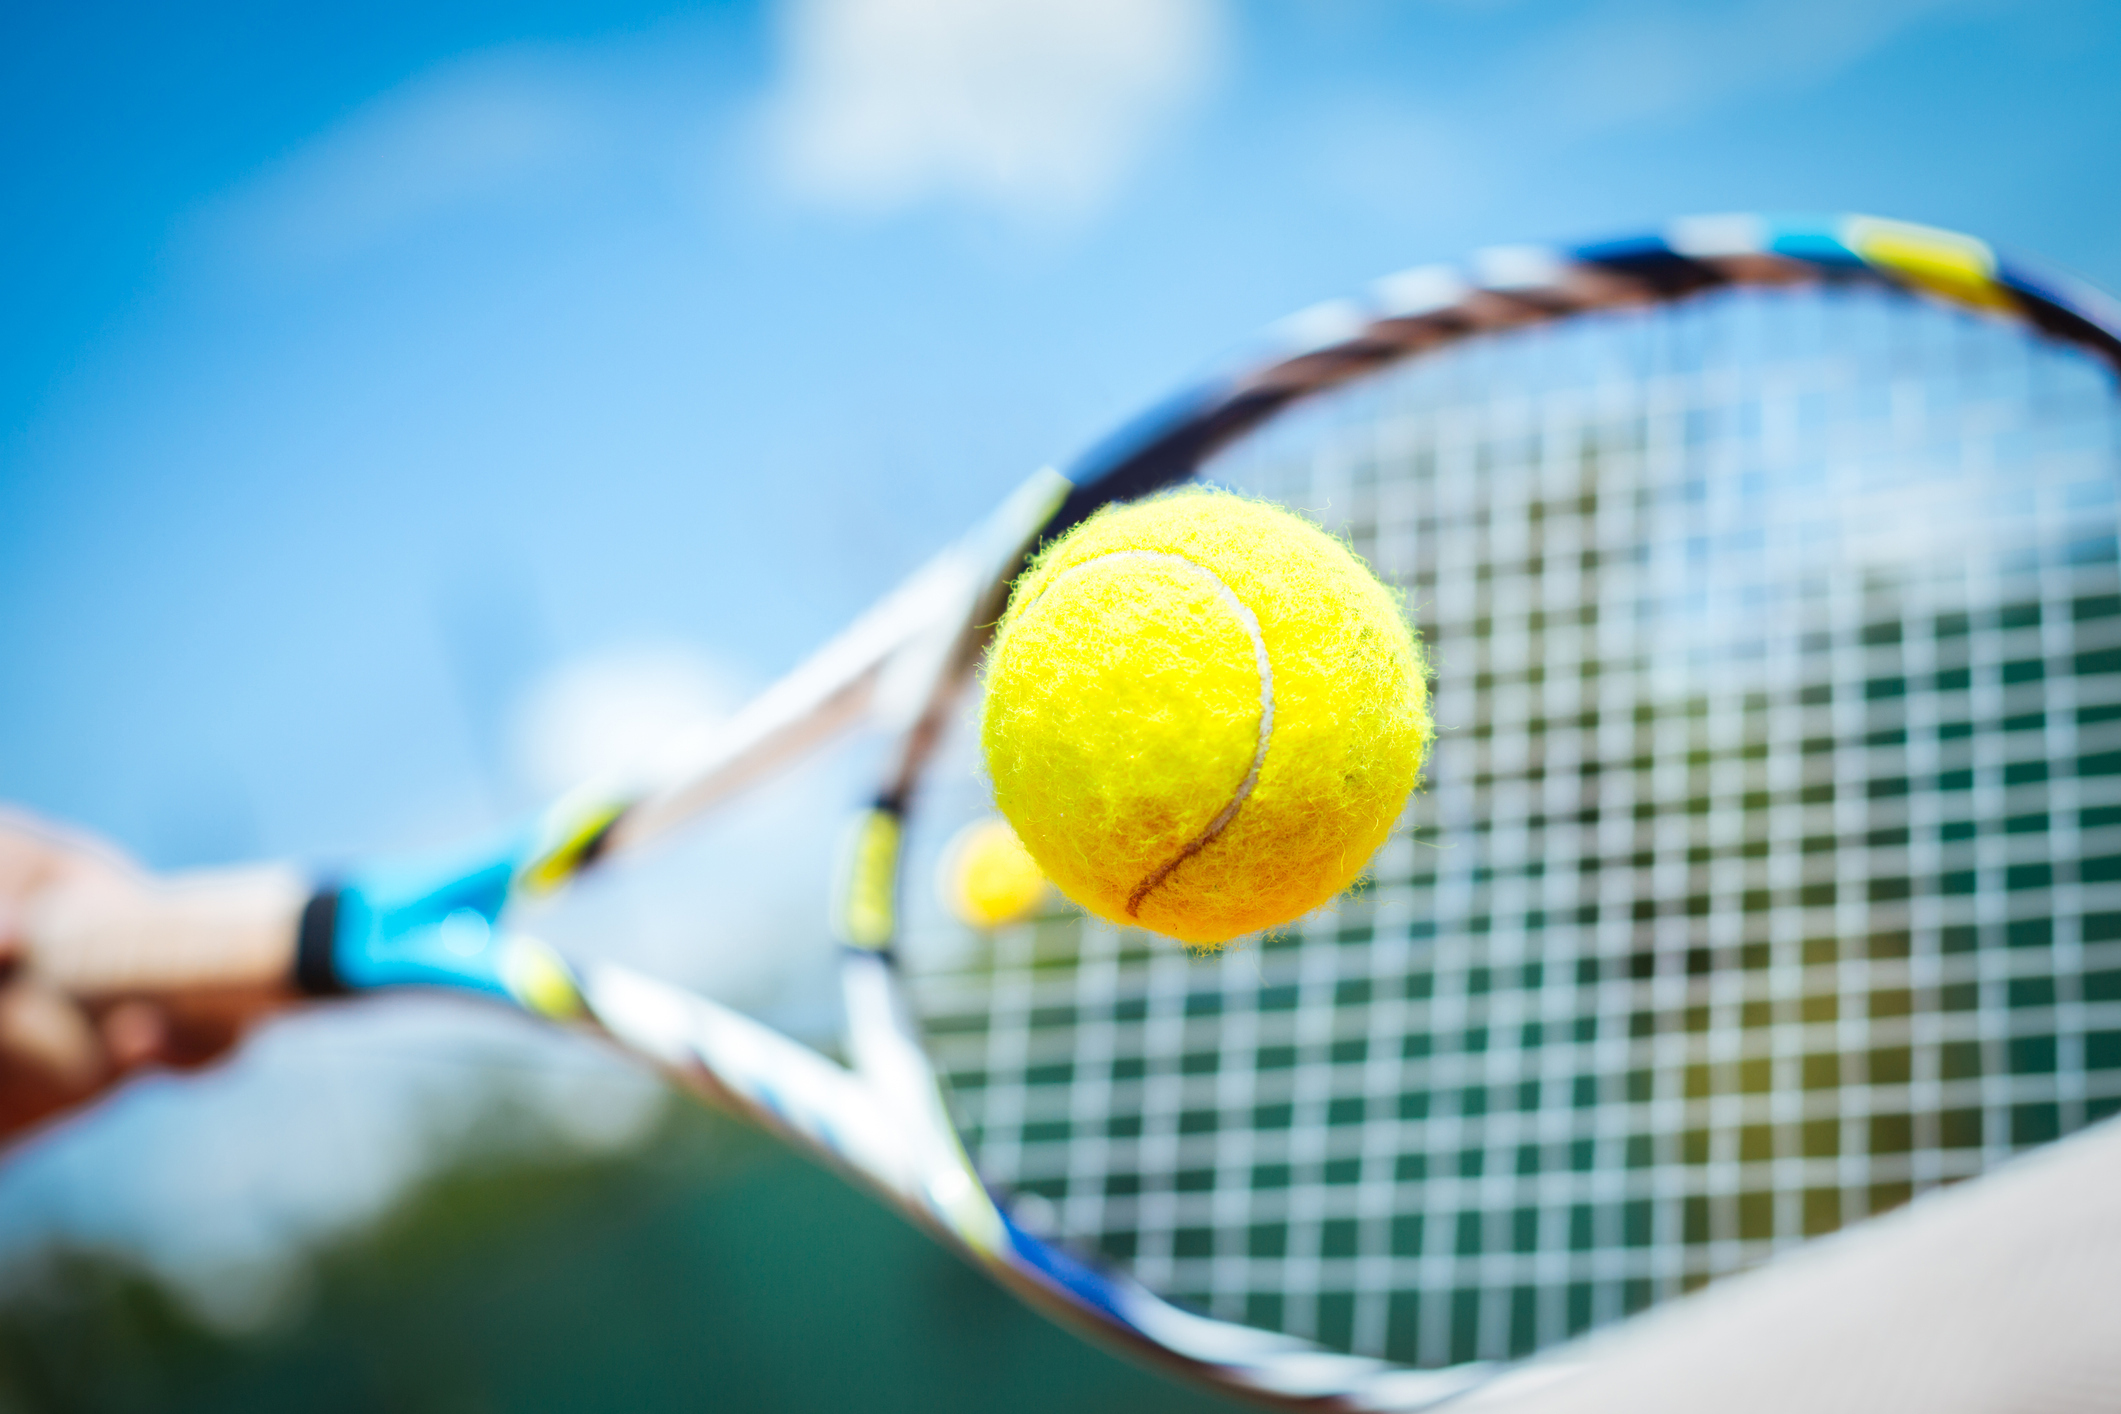 Tennis raquet and ball from The Abaco Club showcasing top notch amenities